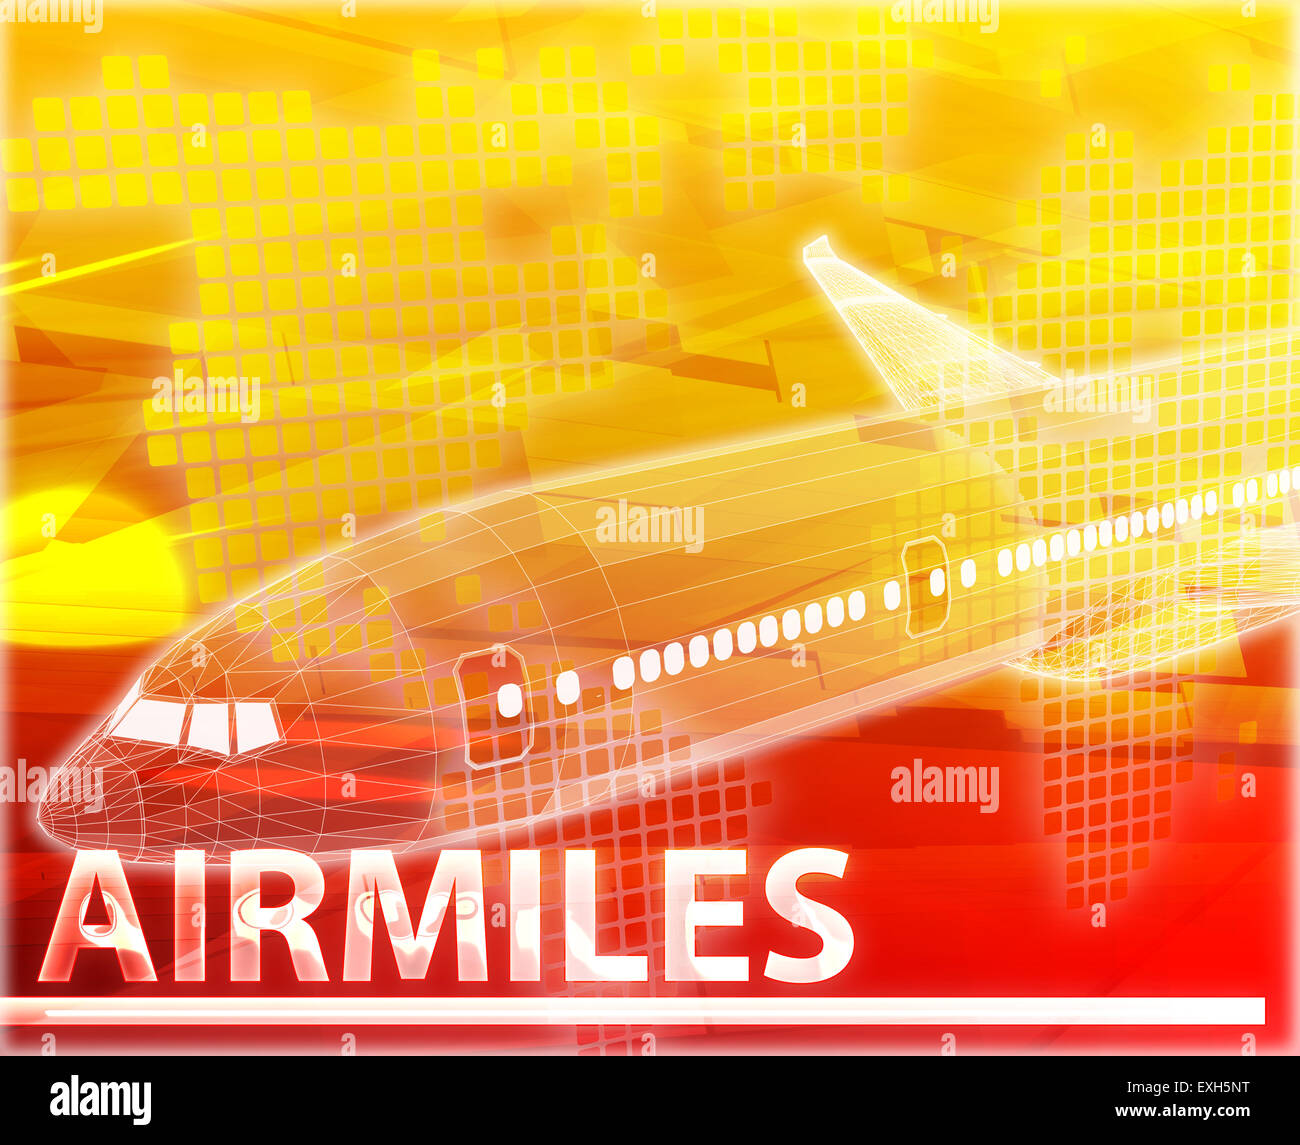 Abstract background digital collage concept illustration airmiles air travel miles Stock Photo